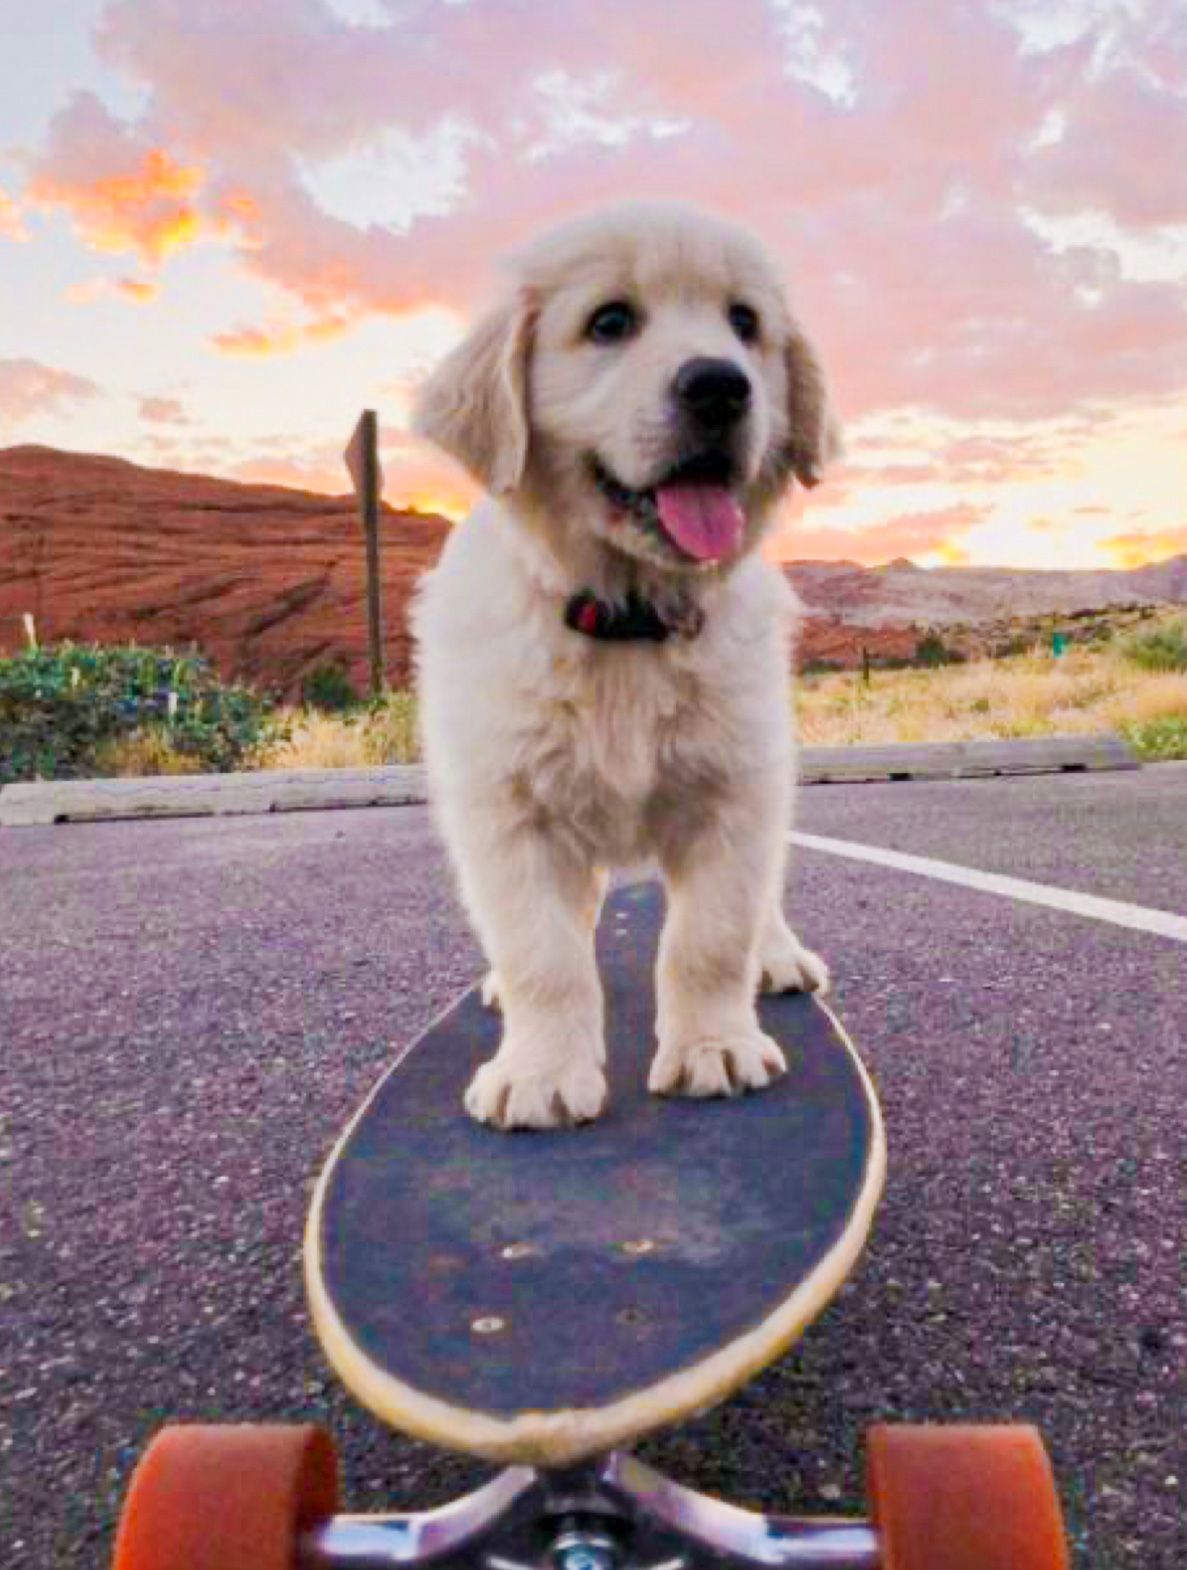 The Coolest Ready For Summer Dogs Darlin'. Cute puppy wallpaper, Cute dog wallpaper, Cute dog picture